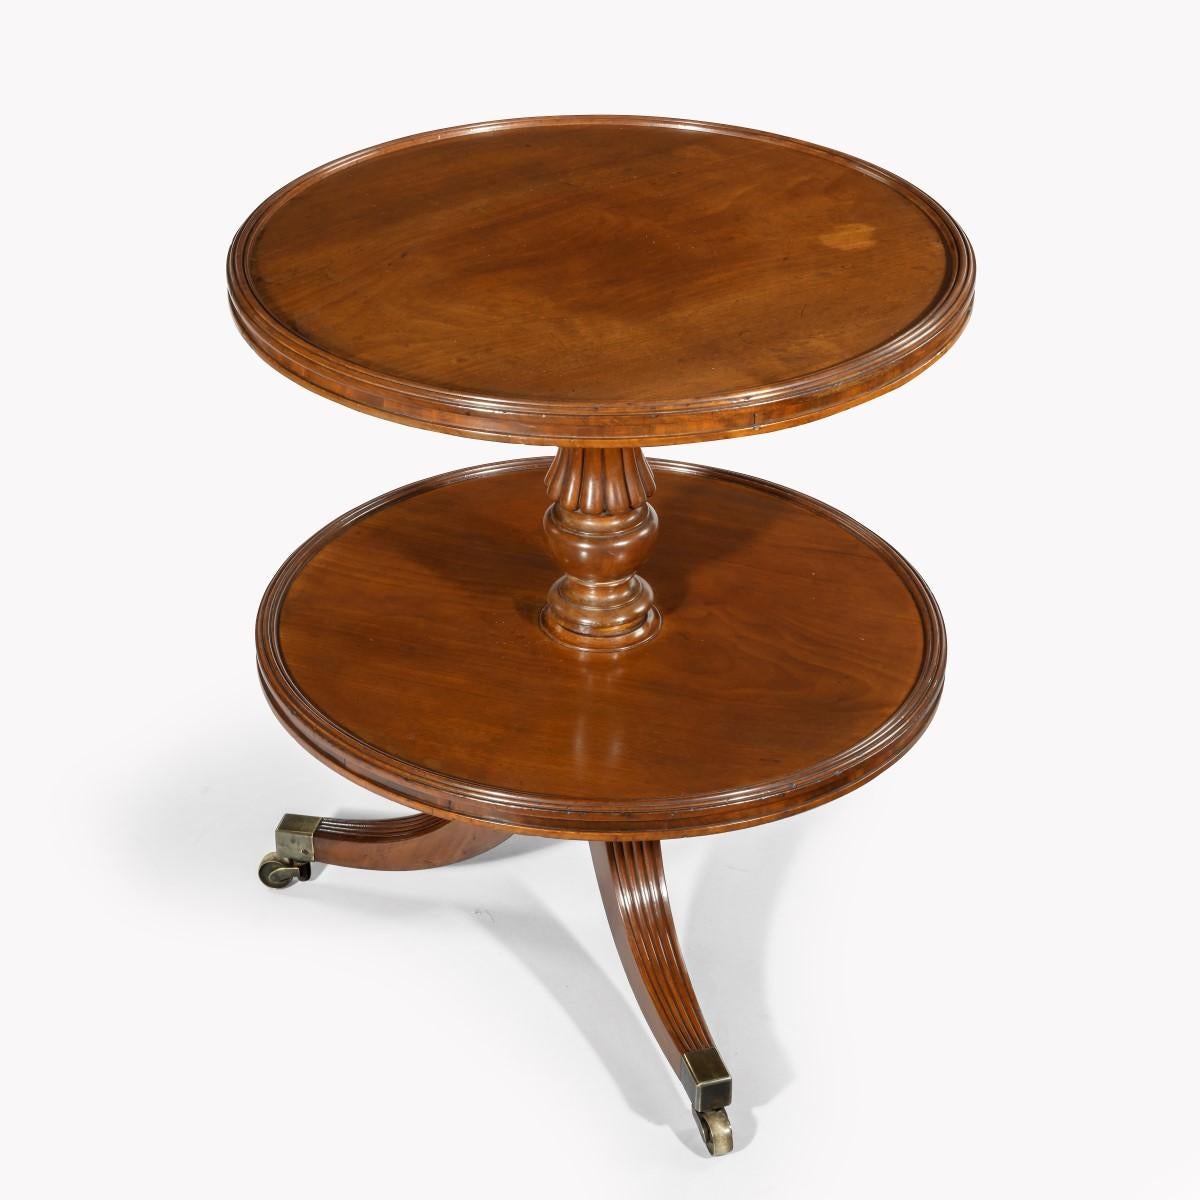 William IV Two Tier Mahogany Table Attribruted to Gillows For Sale 1